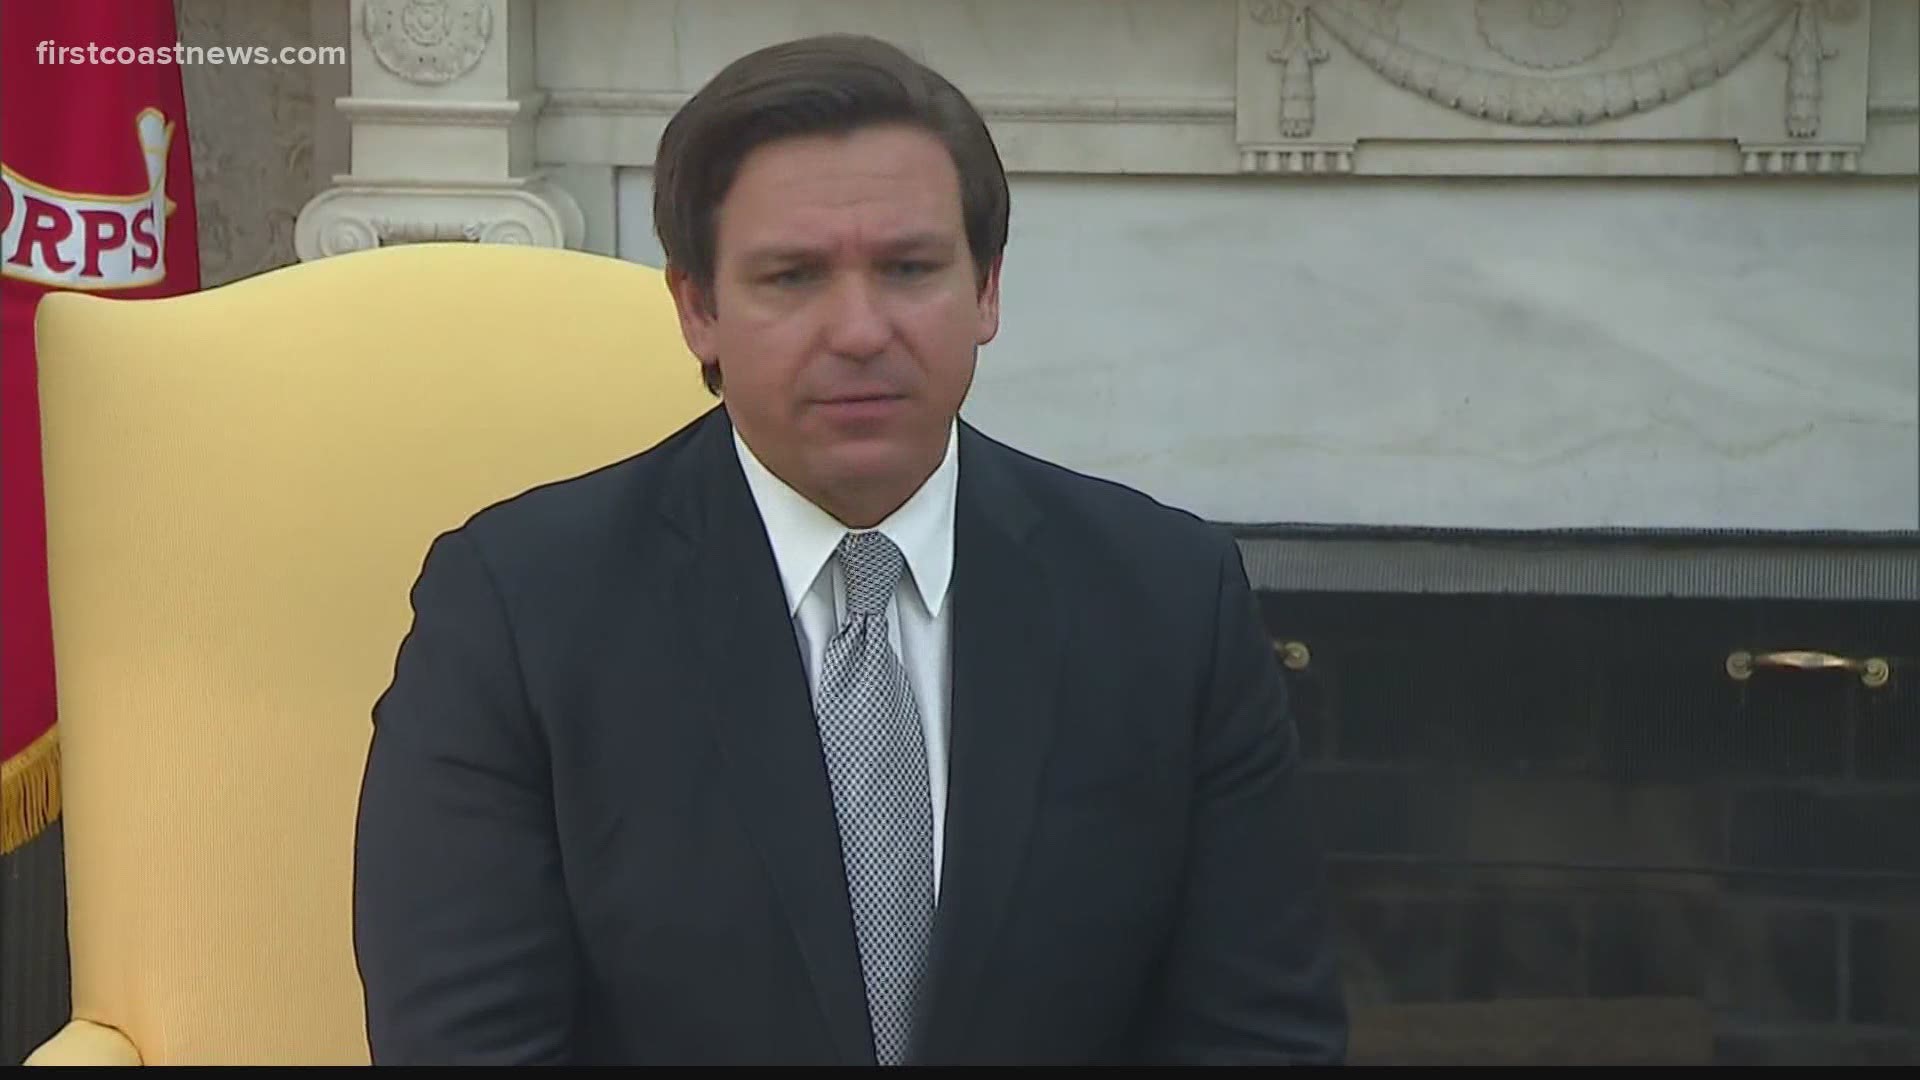 The governor met with President Donald Trump and announced plans to be revealed Wednesday for reopening the state.